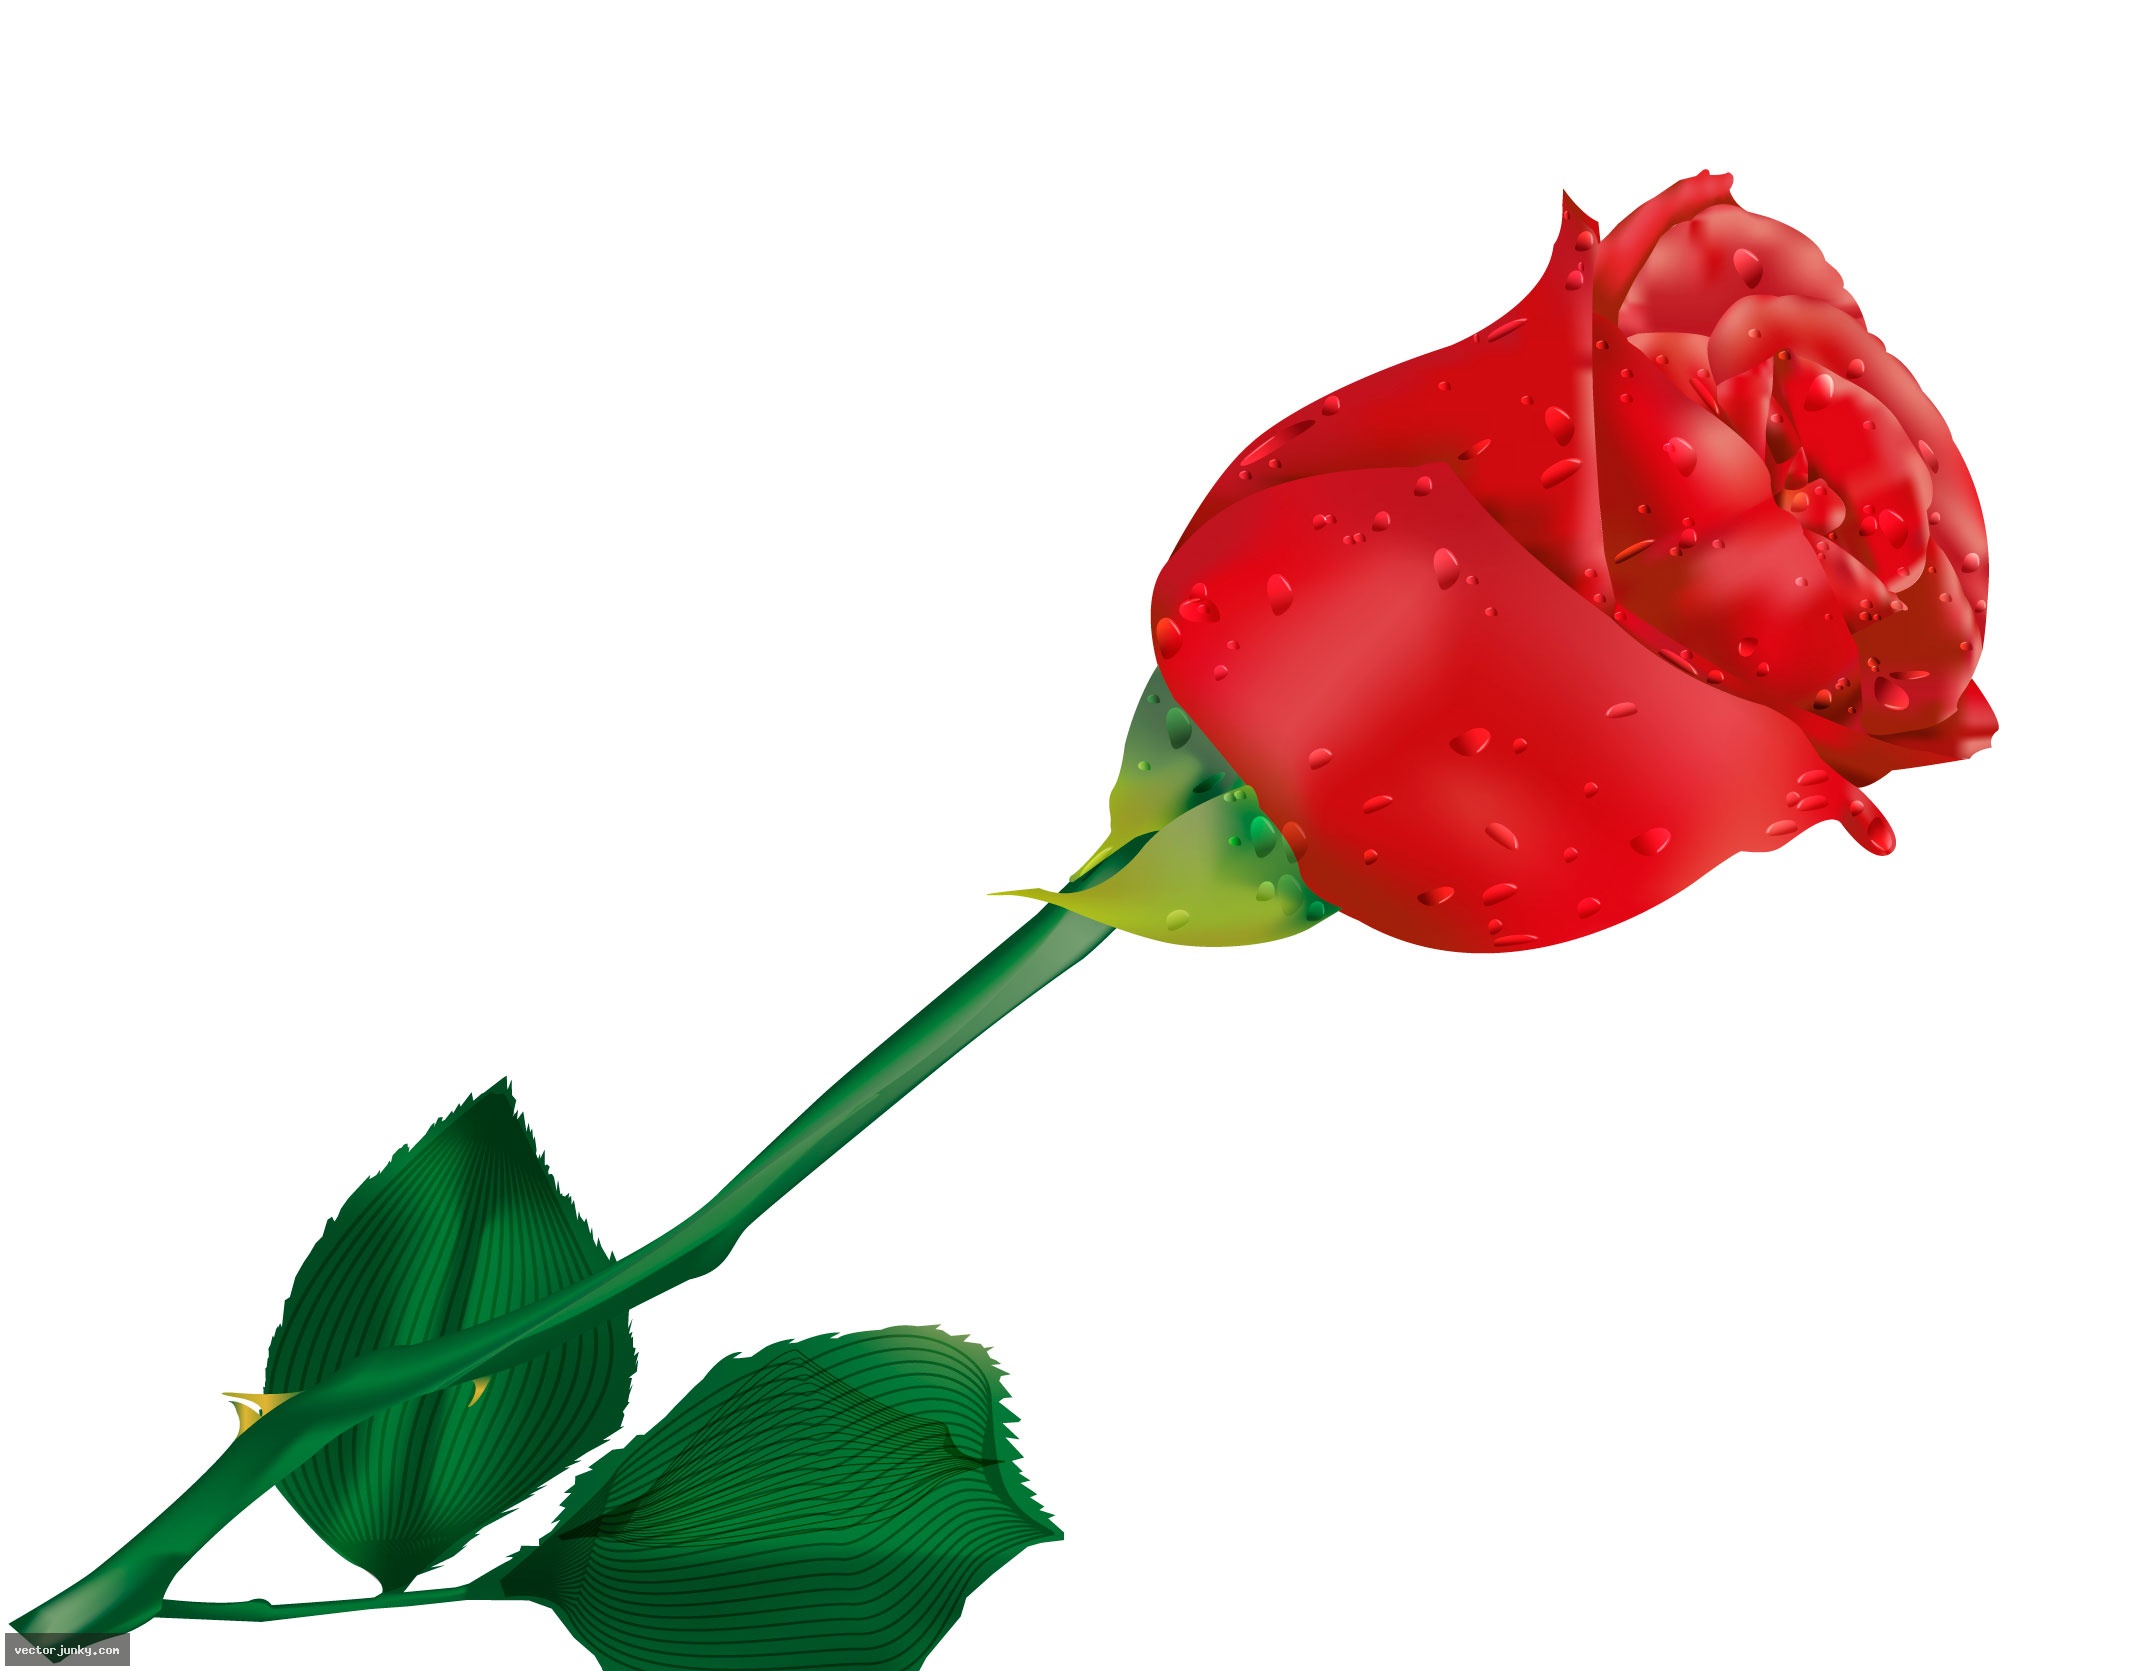 Red Rose Image With Thorns And Long Stem Clipart - Free Clip Art ...